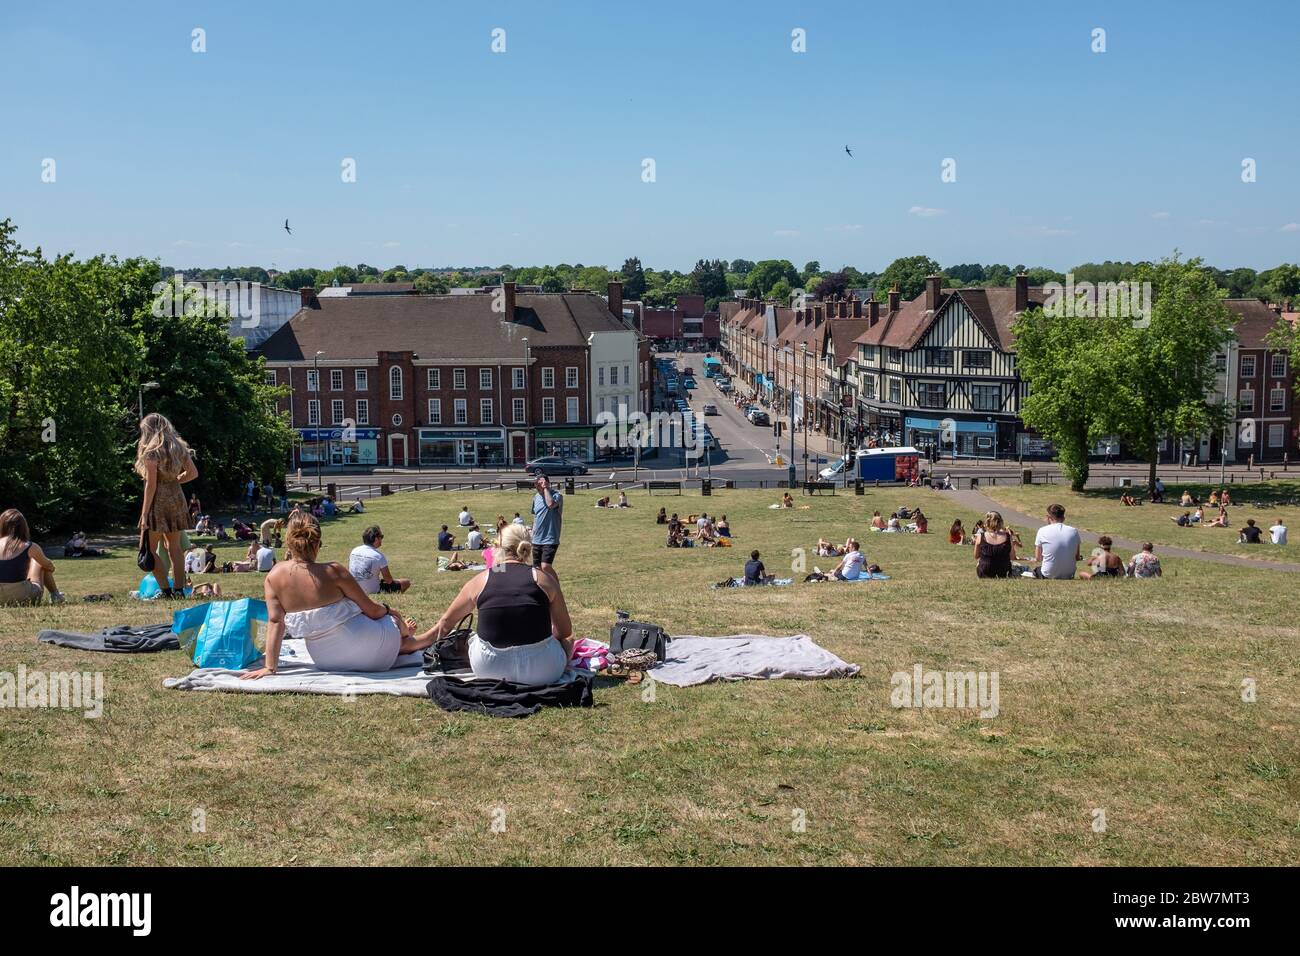 View of people sitting on Windmill Hill overlooking town of Hitchin, Hertfordshire during first few days of lockdown easing during COVID-19 pandemic Stock Photo